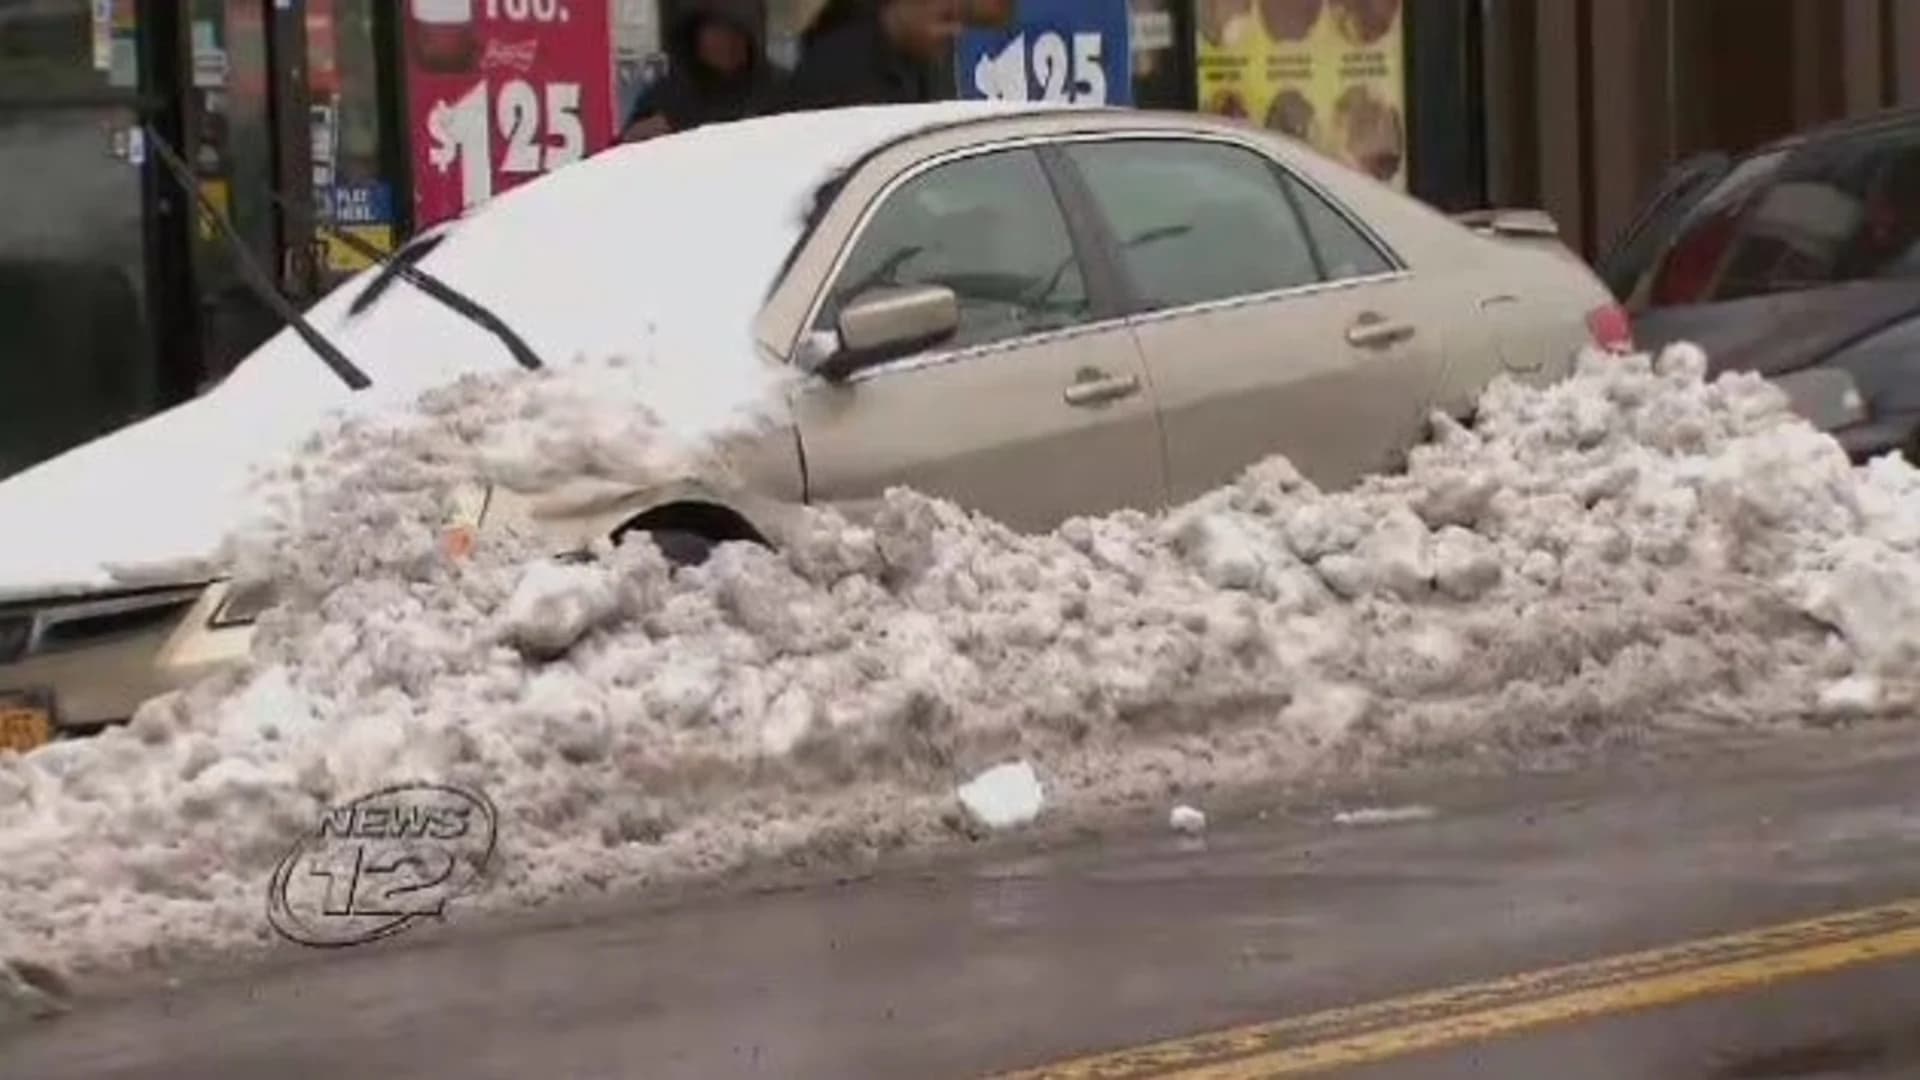 Arduous task of digging out begins in Yonkers